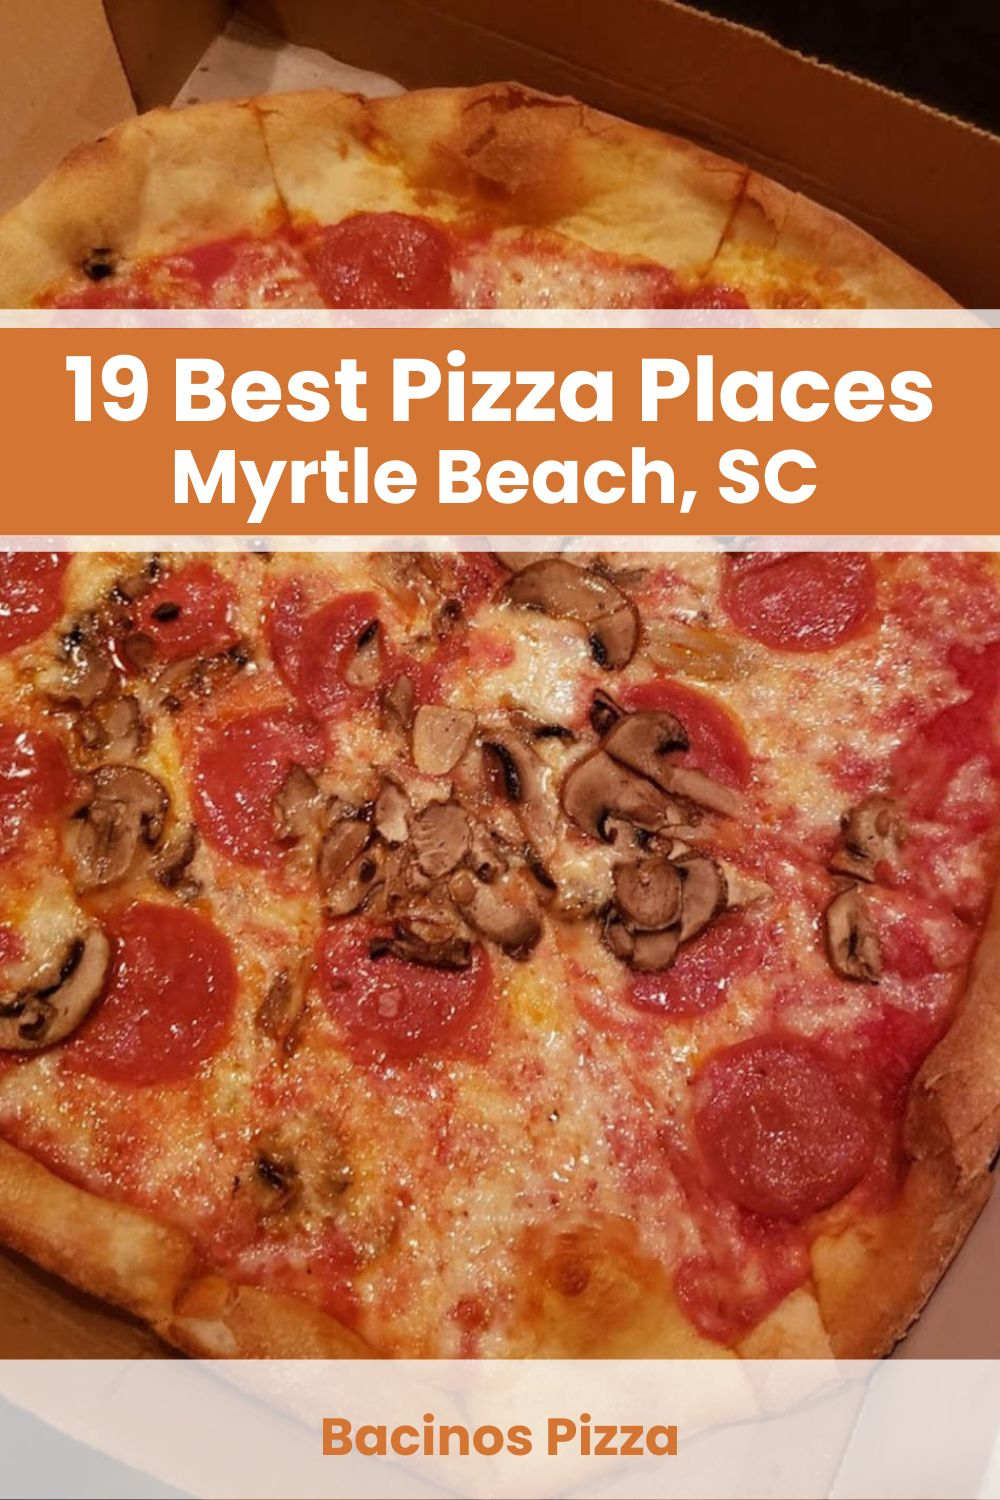 Pizza Places in the Myrtle Beach